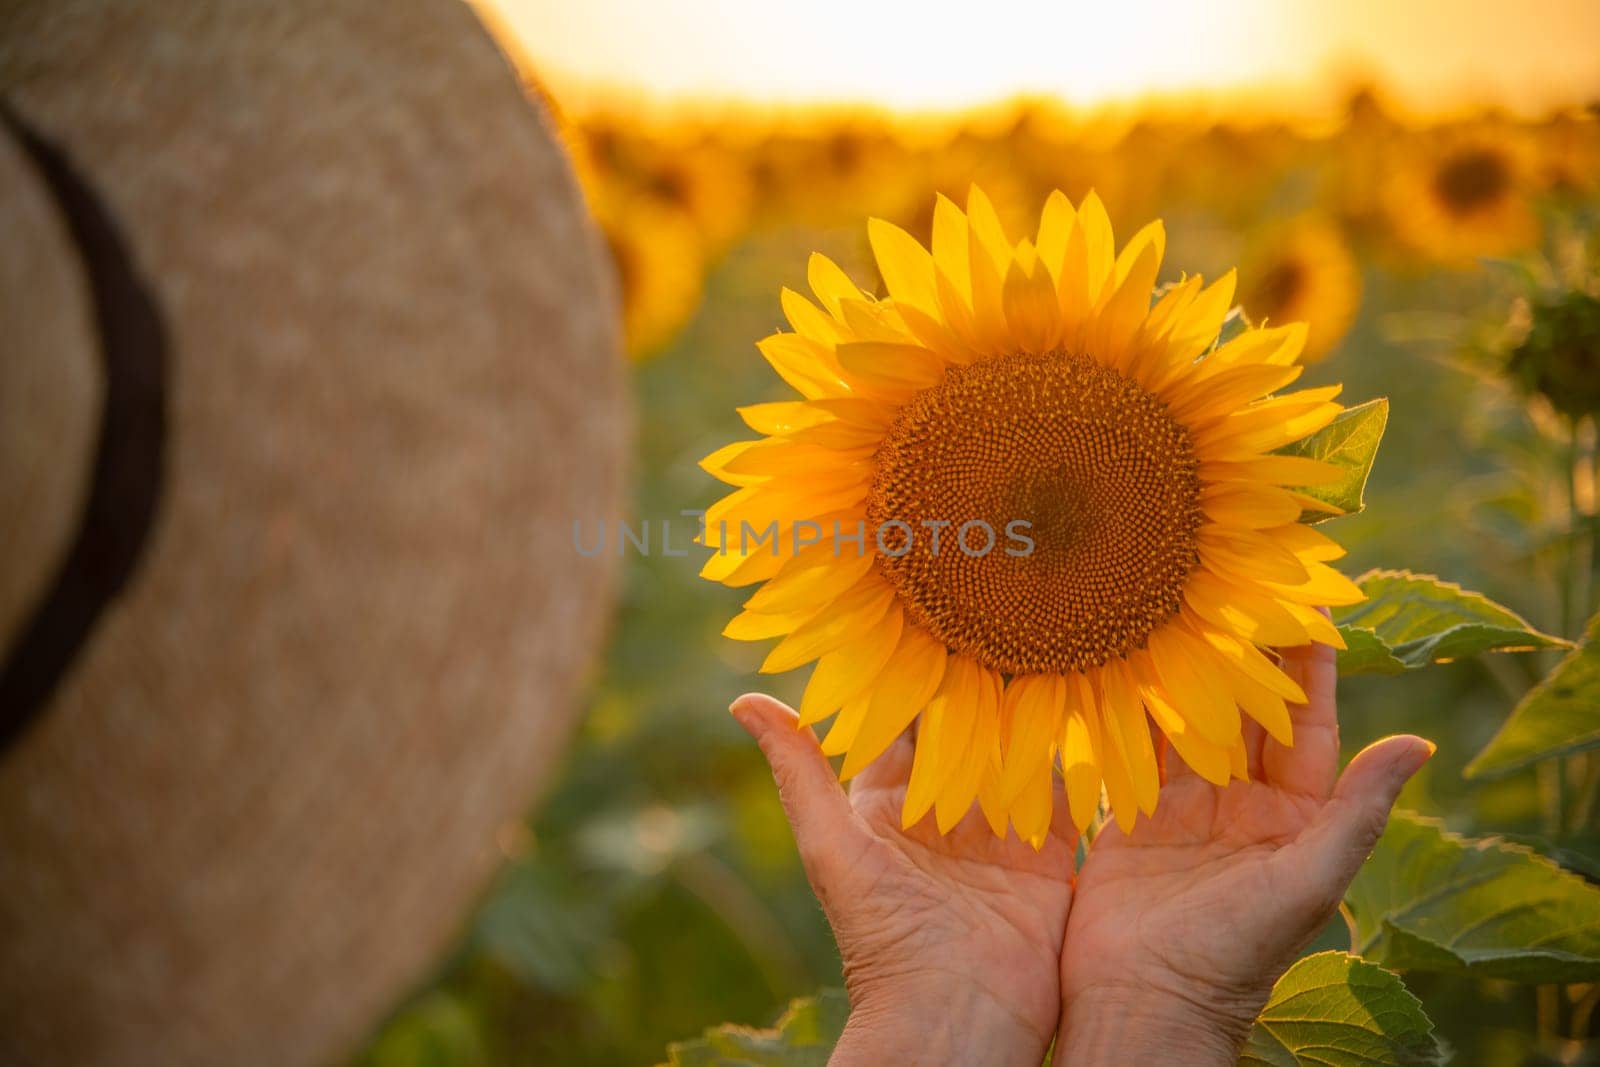 Female hands holding sunflower flower against the backdrop of a sunflower field at sunset light. Concept agriculture oil production growing sunflower seeds for oil by Matiunina